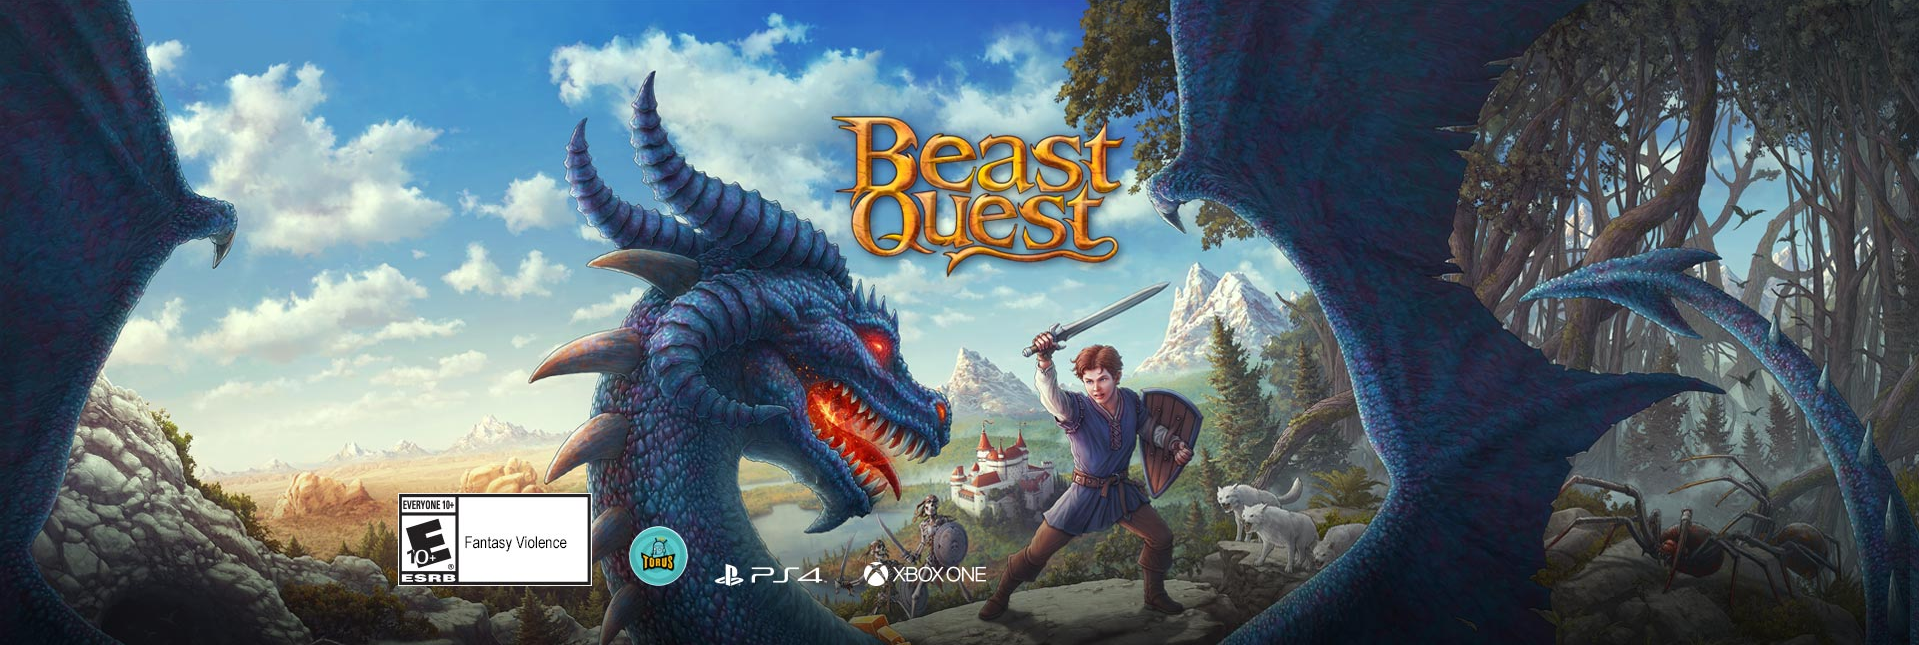 game beast quest